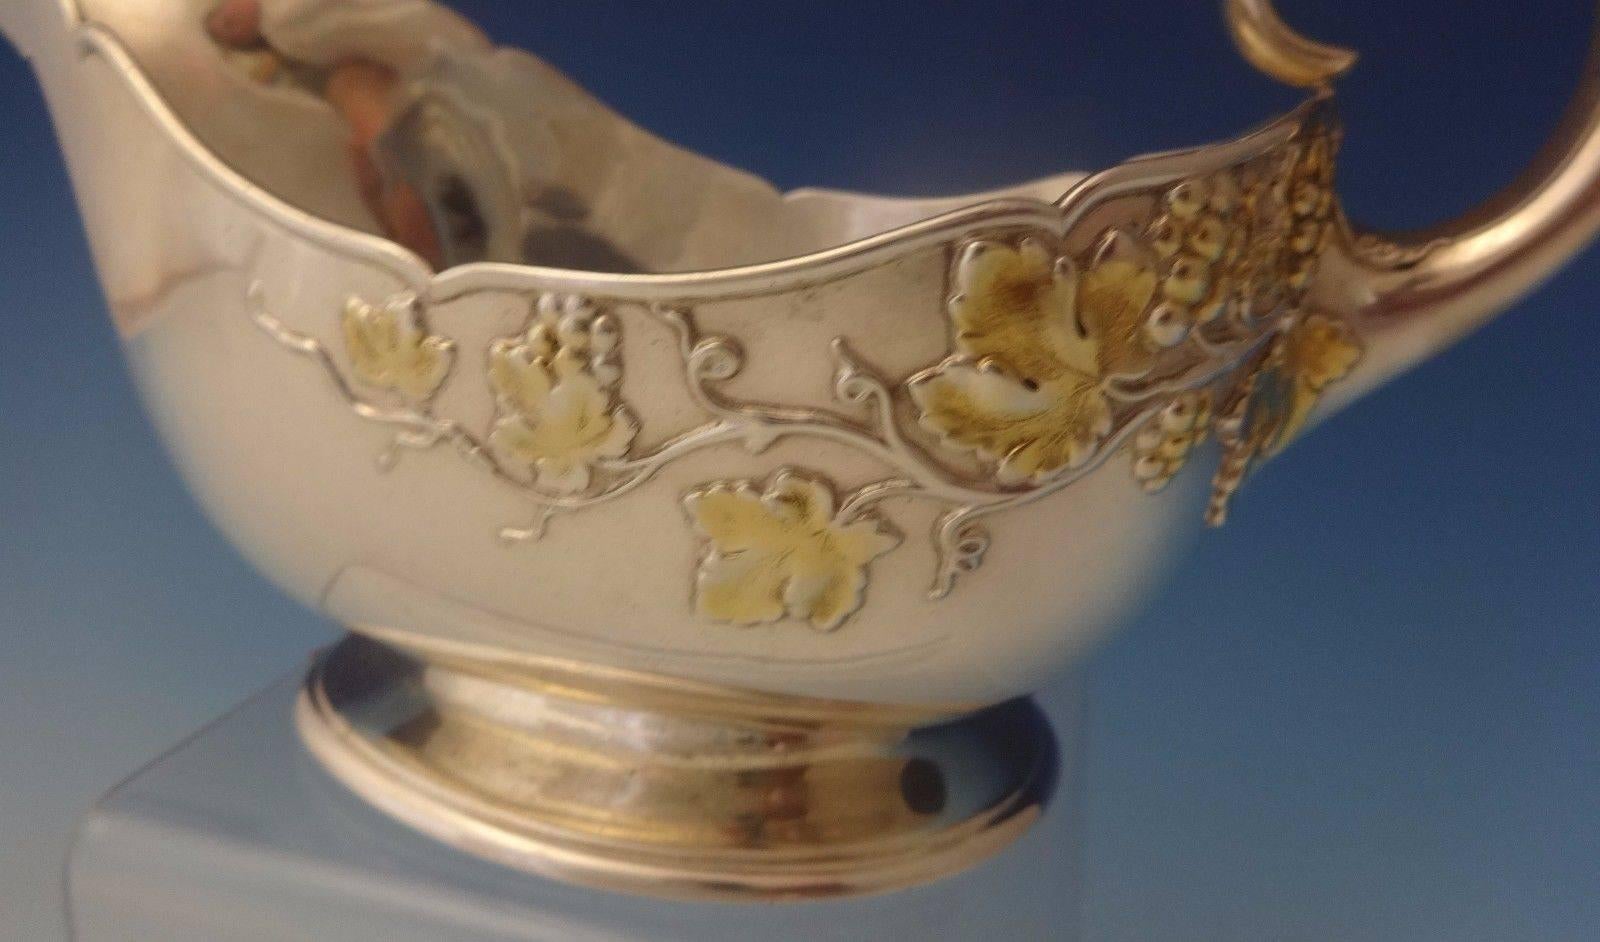 Late 19th Century Mixed Metals by Tiffany Sterling Gravy Boat with Grape Vine Motif Hollowware